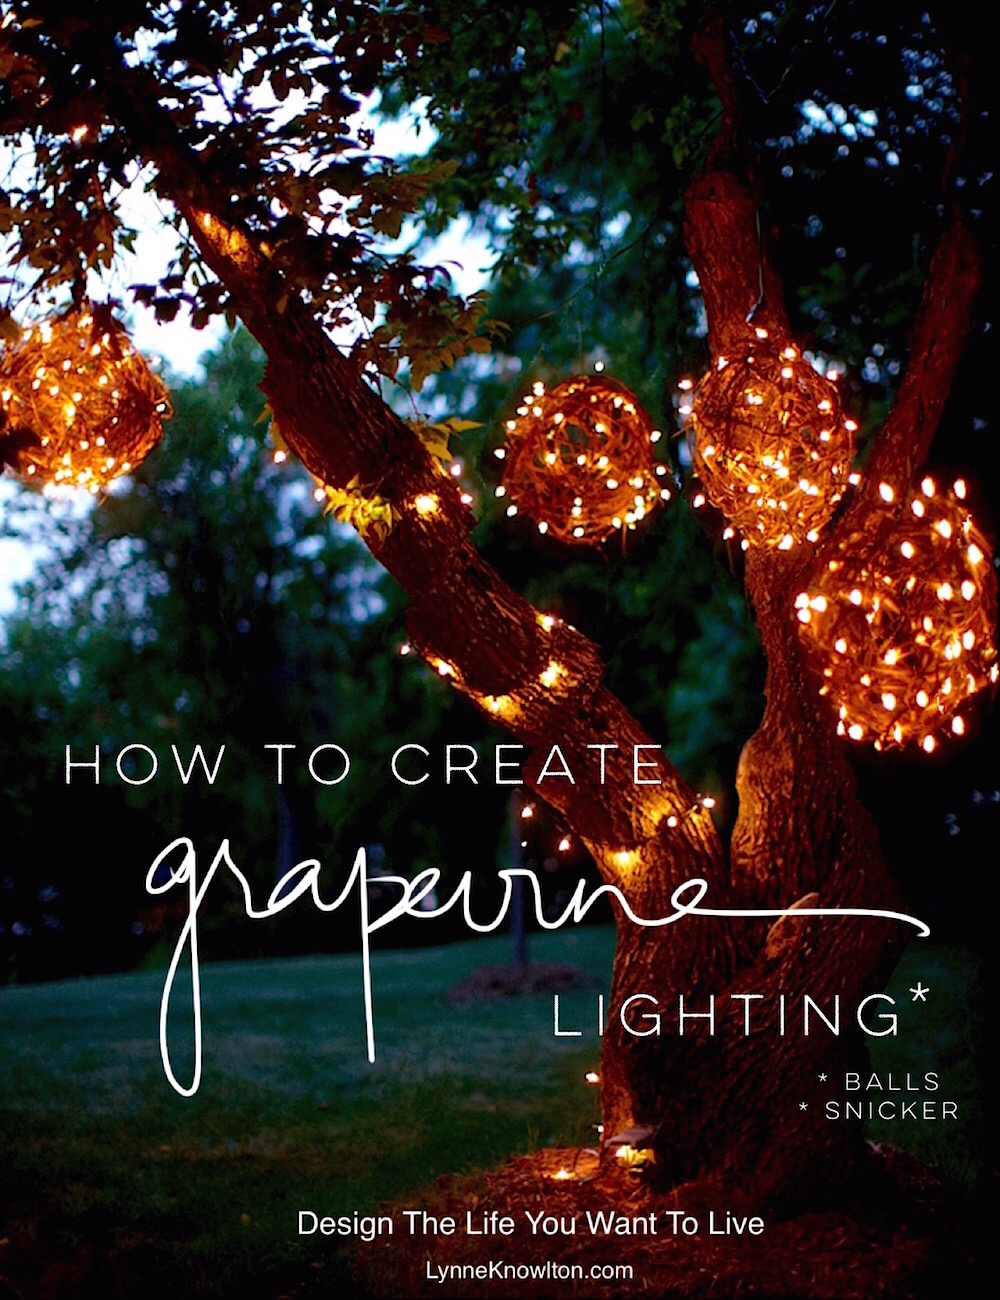 How to make grapevine lighting balls | DESIGN THE LIFE YOU WANT TO LIVE | www.lynneknowlton.com